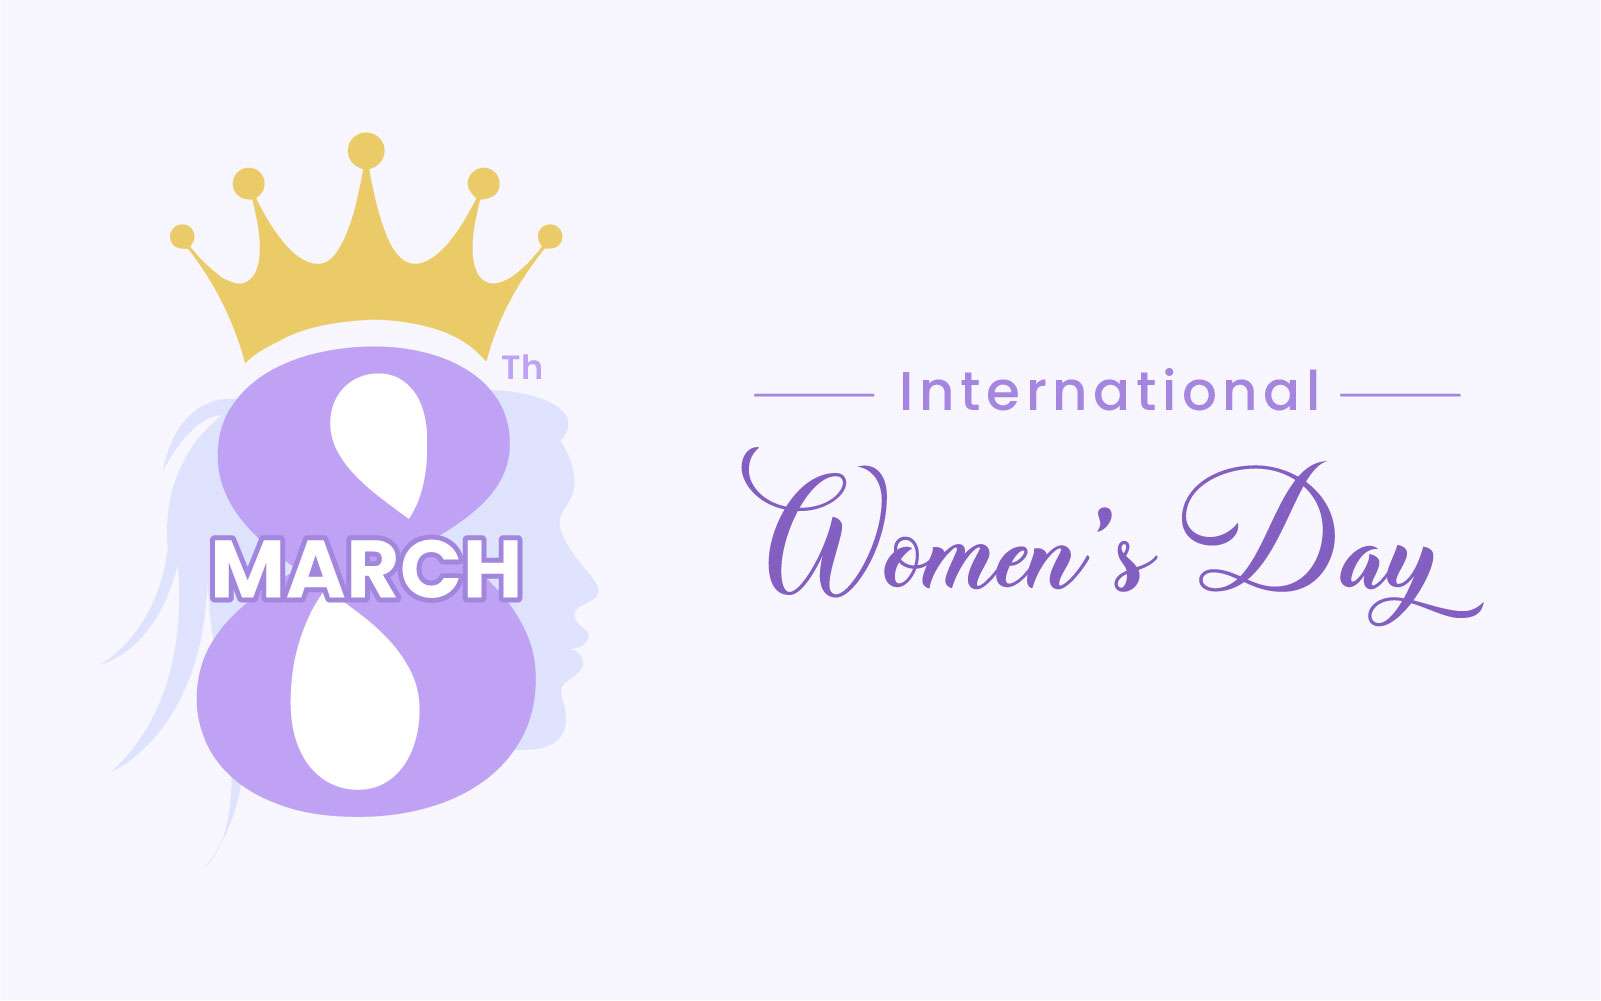 8th march international women's day vector image